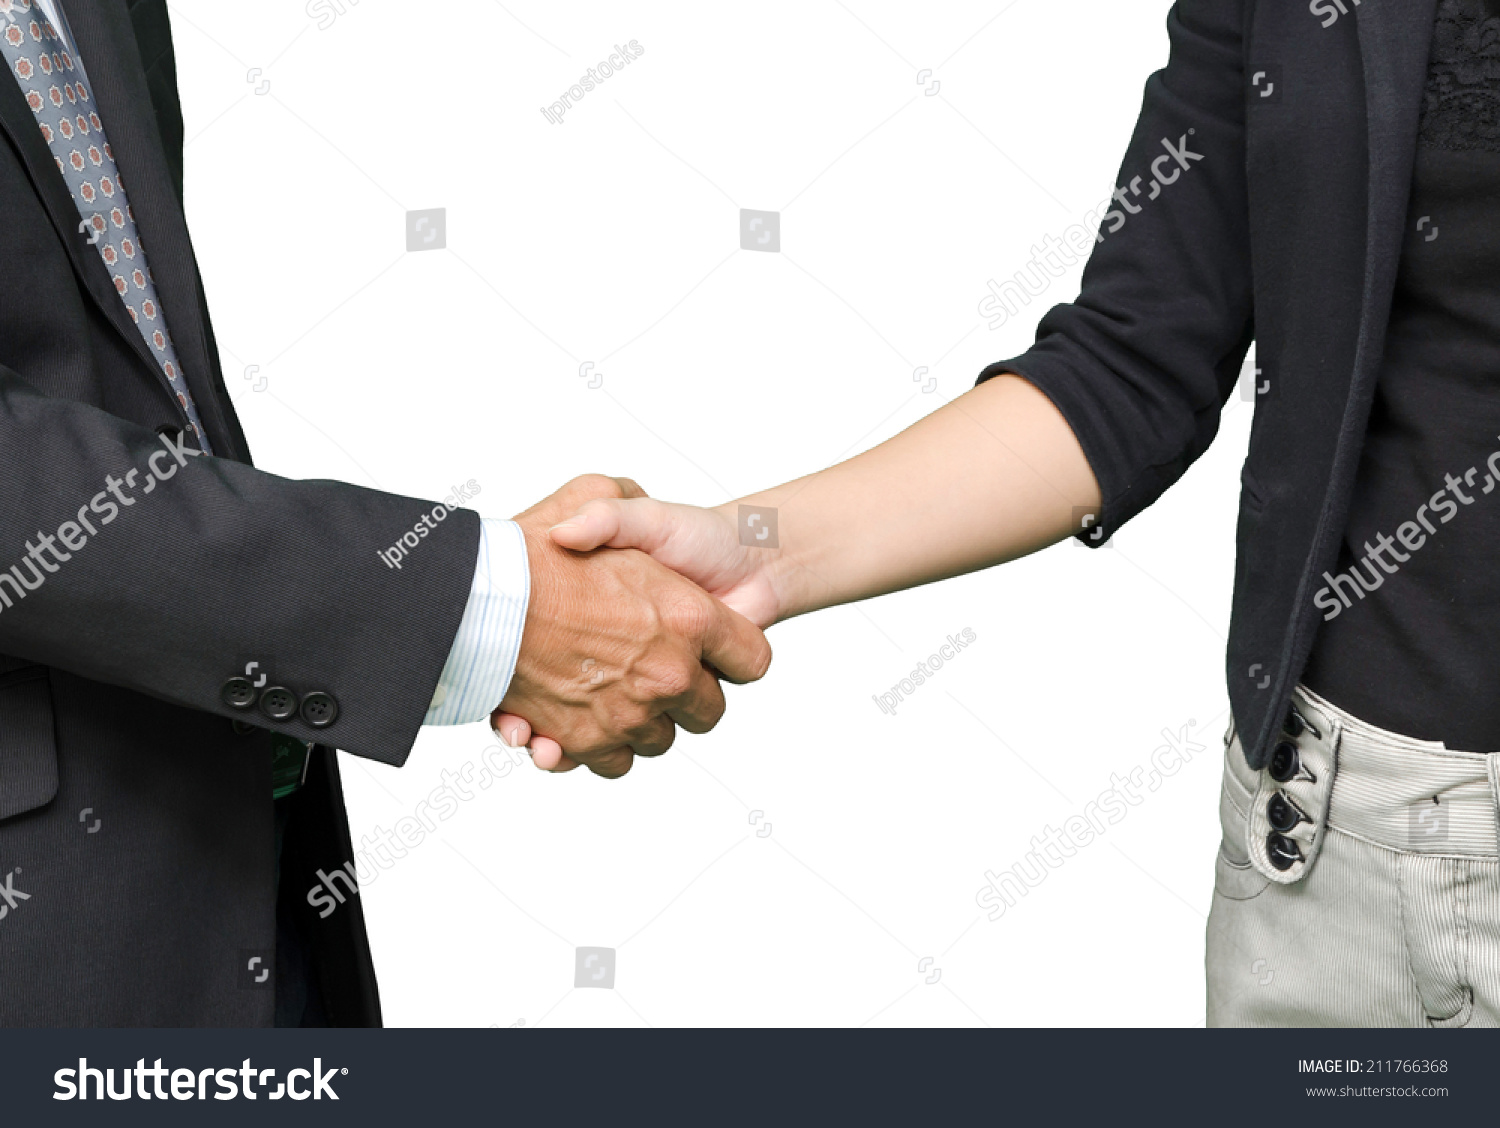 business people shaking hands, isolated on white background #211766368